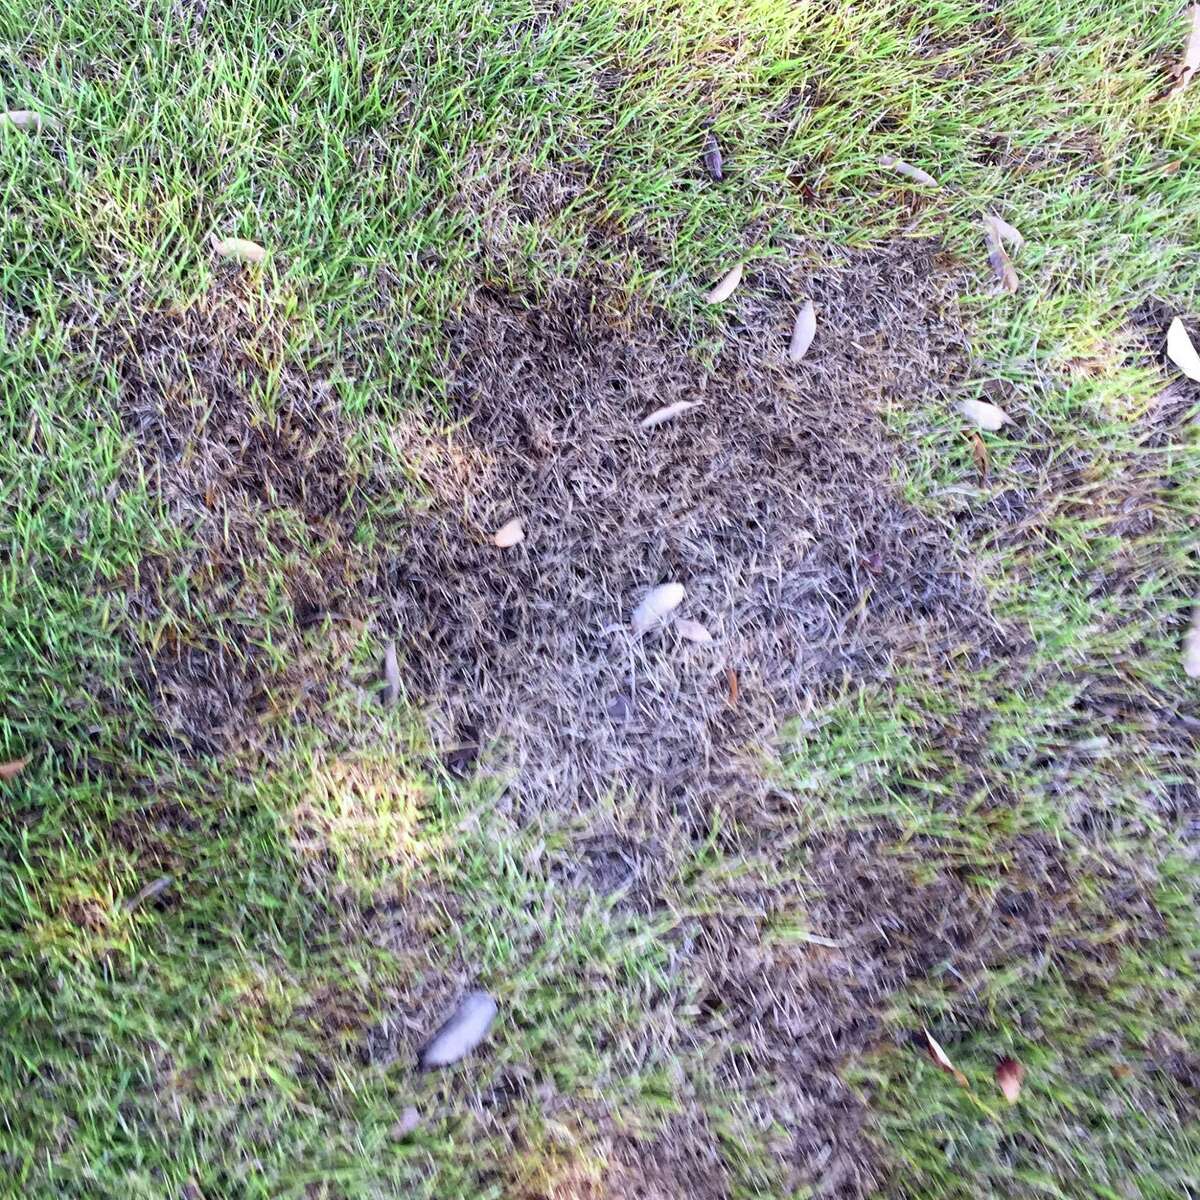 Rotting at the base of yellowed blades of zoysia grass could be dollar spot fungus, a problem that can be treated with fungicide.